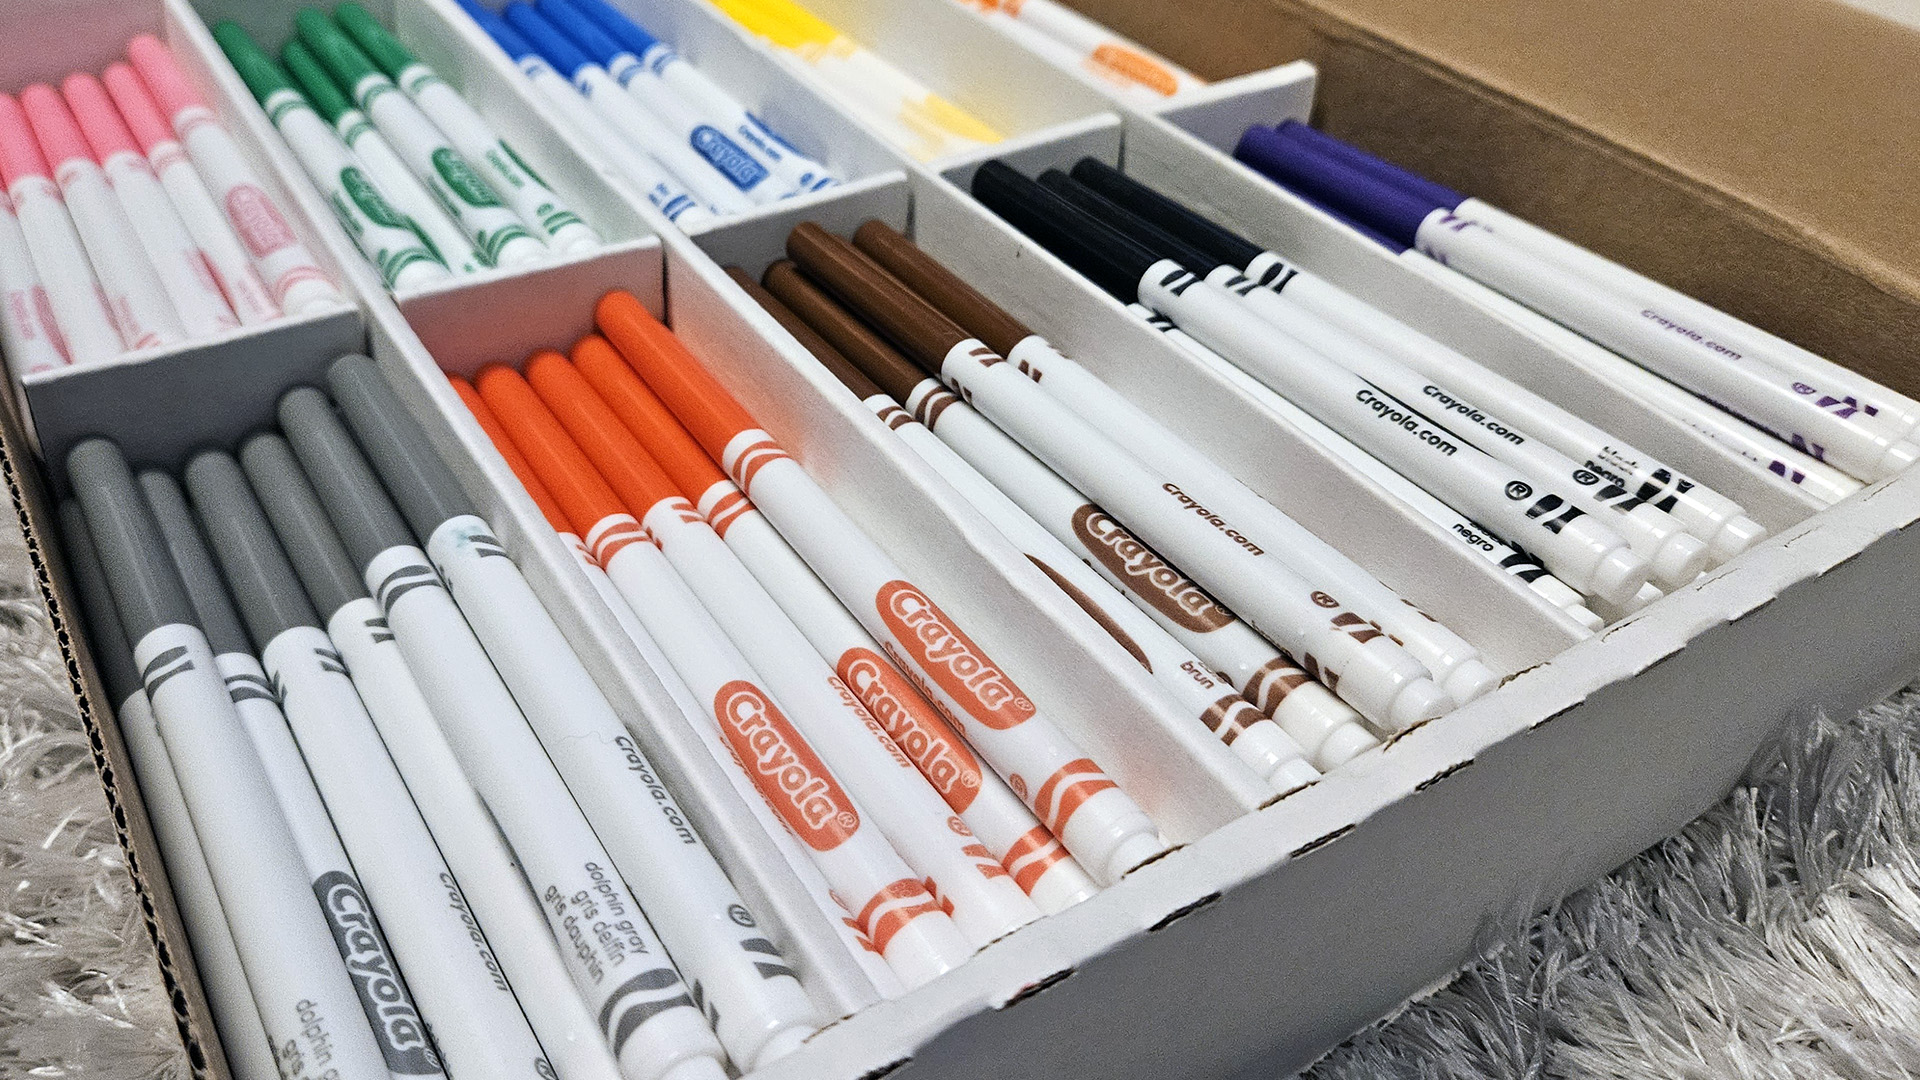 Crayola thin markers in ten different colors are organized in sections of a cardboard box sitting on top of a high pile carpet.